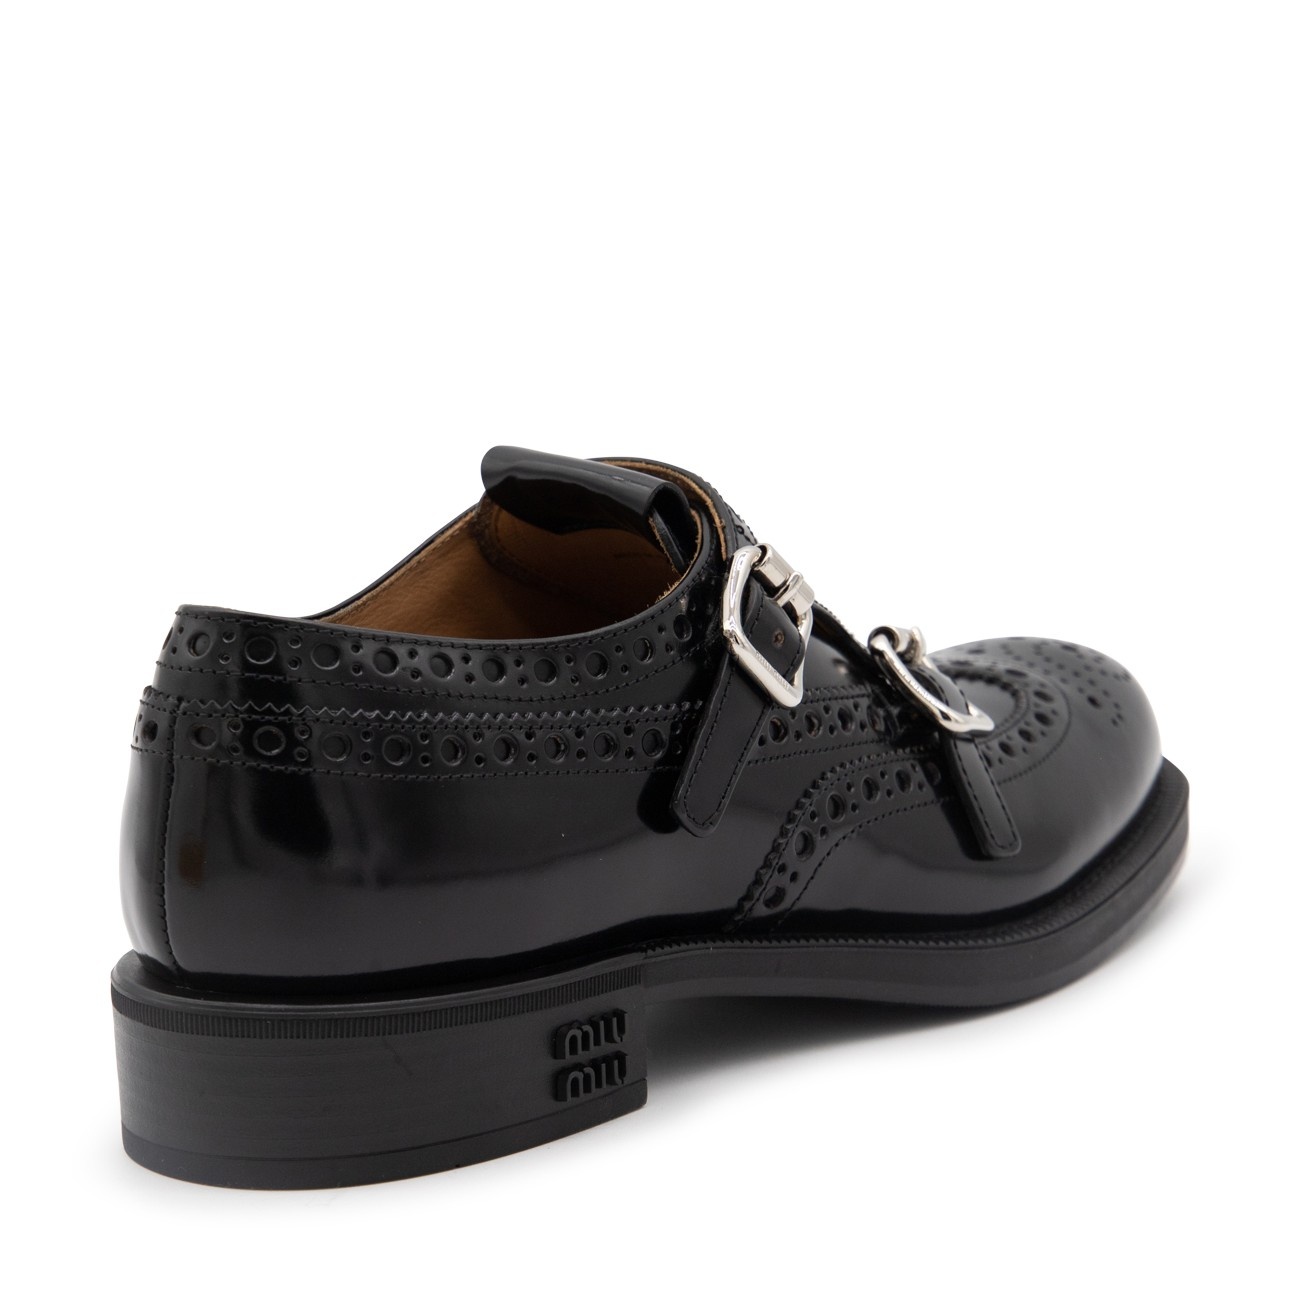 black leather formal shoes - 3